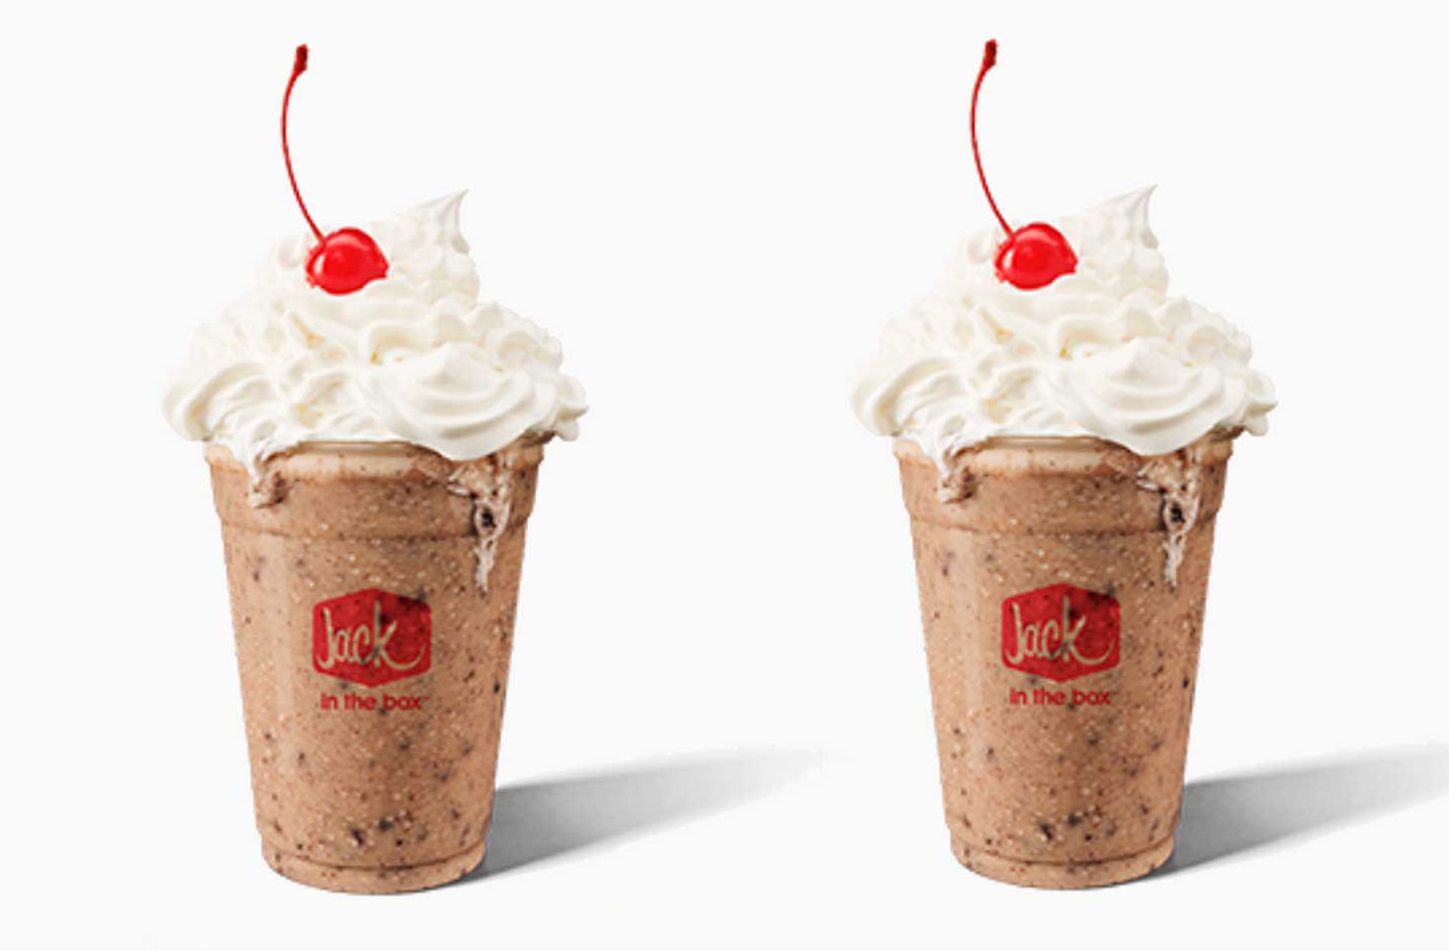 The New Oreo Cookie Ultimate Chocolate Shake Arrives for a Short Time at Jack in the Box